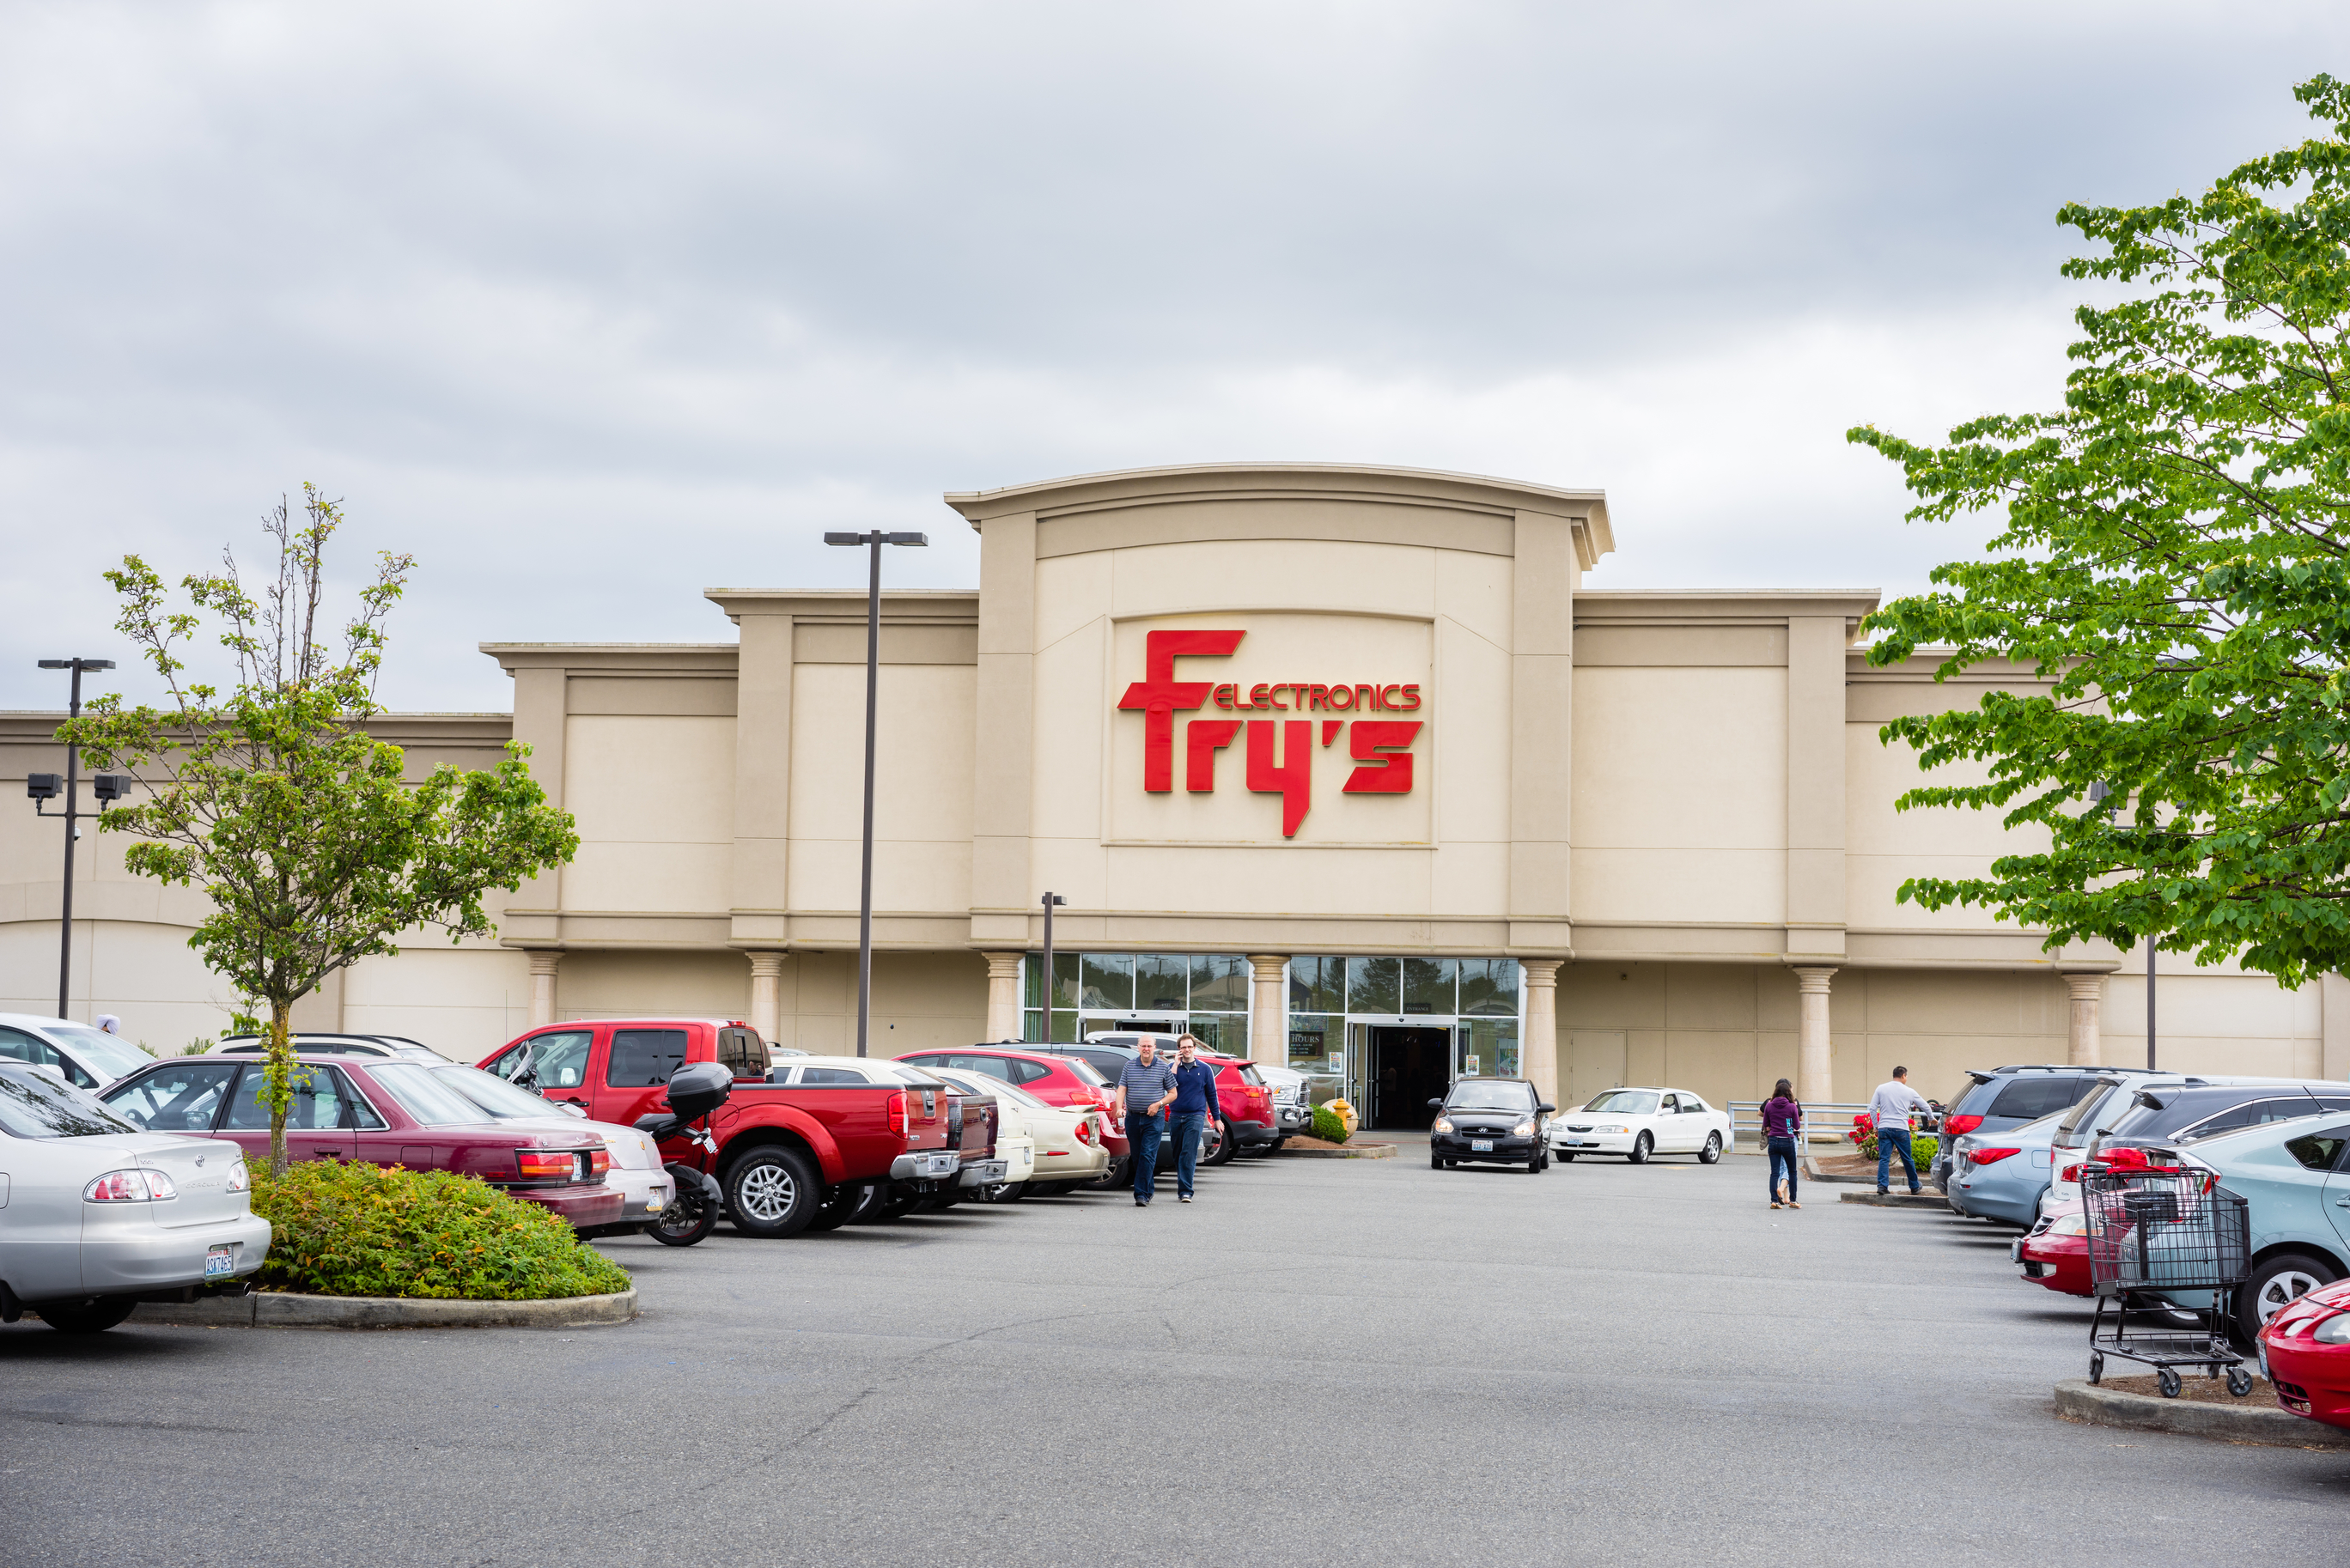 5 ways to save at Fry’s Electronics